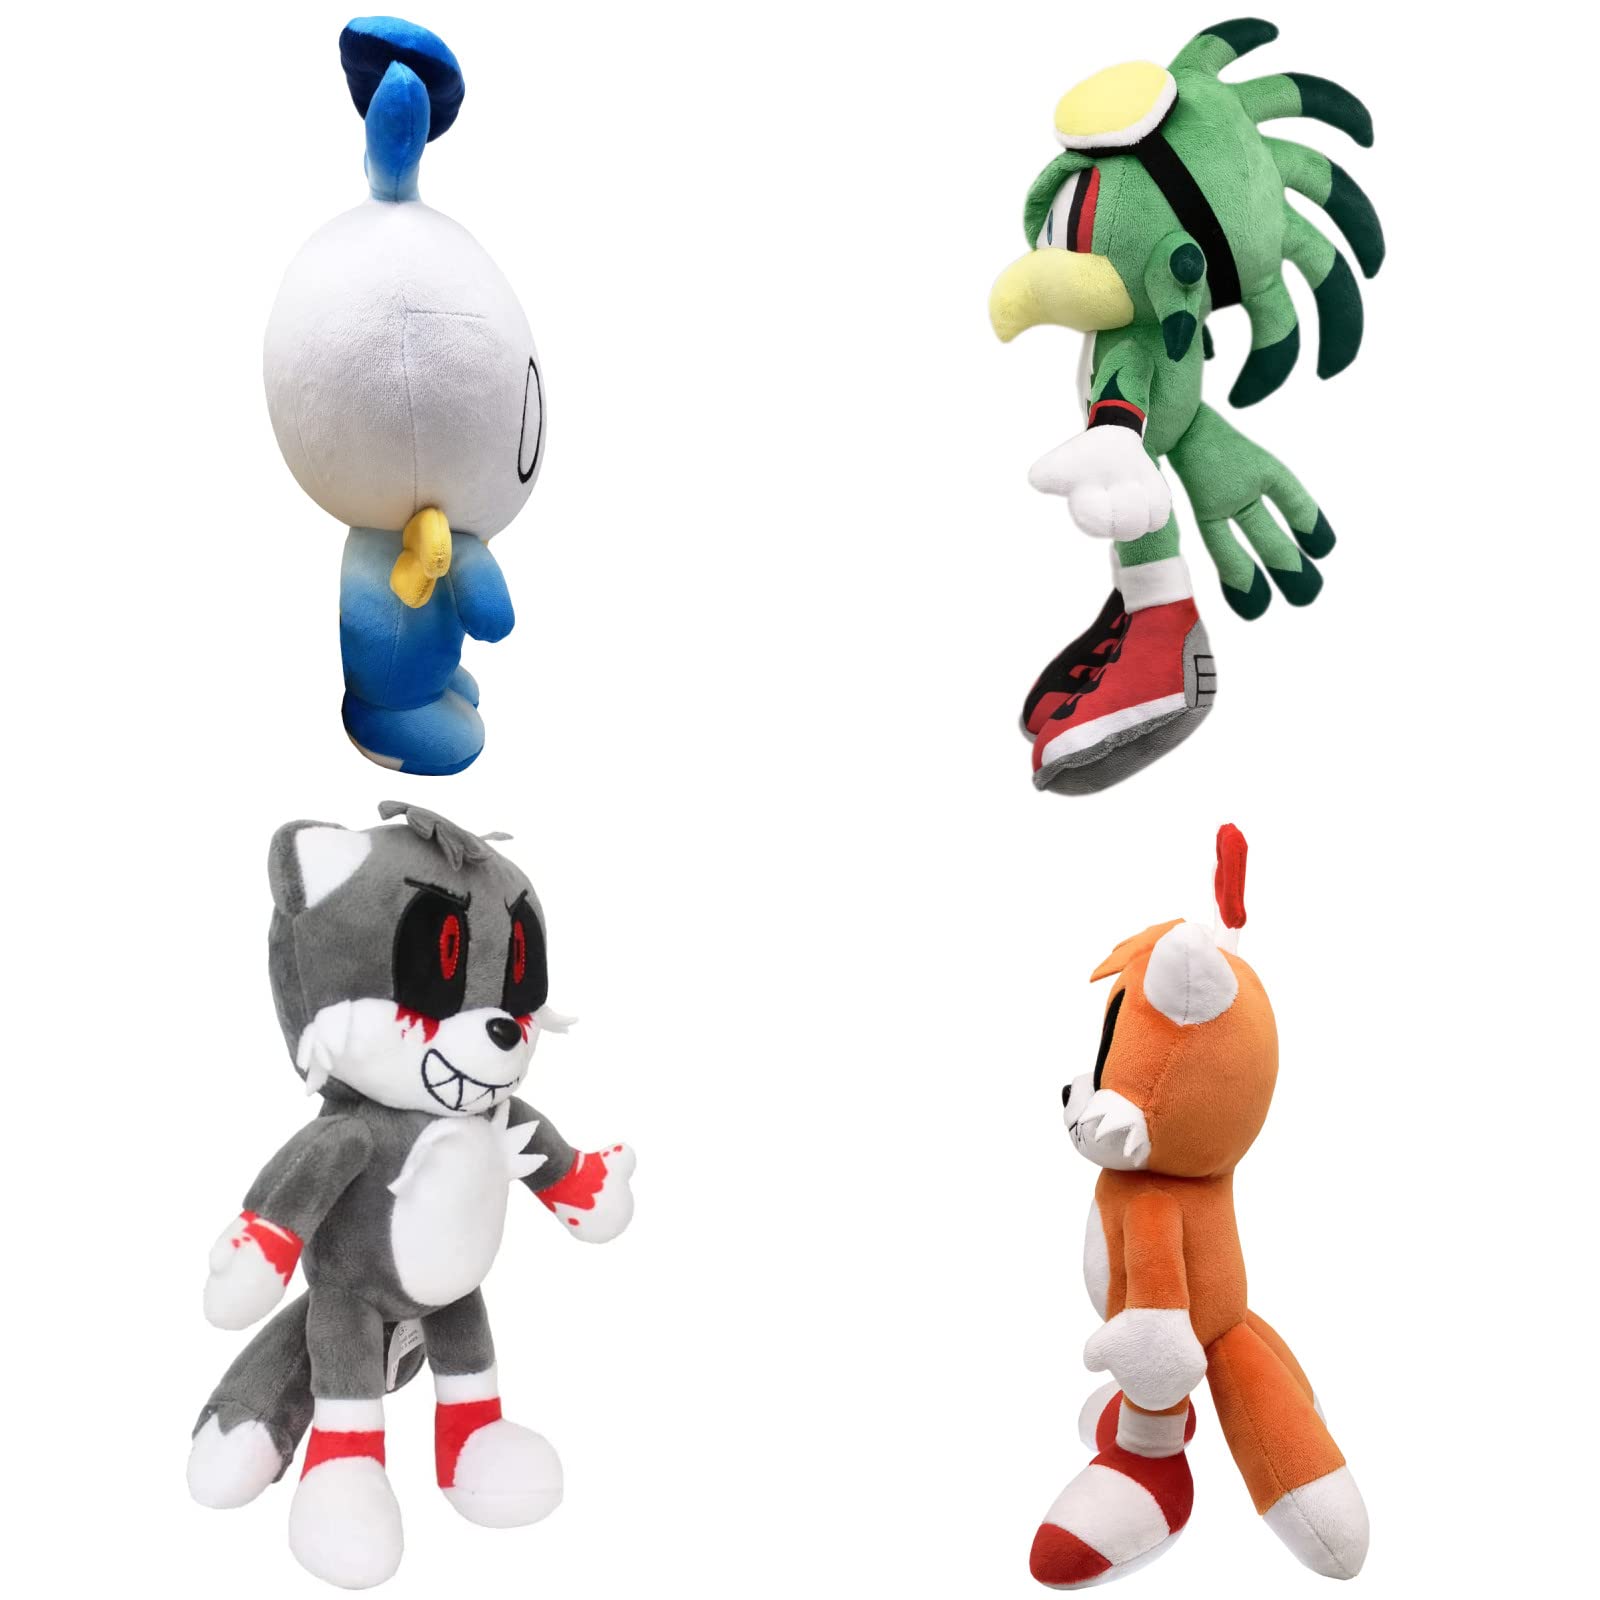  11.8inch Blood Tails Plush Toy, Evil Tails Stuffed Plush Doll,  Dark Tails Doll, from Popular Sonic Games,Grey Tails Toys for Birthday  Gifts Game Fan : Toys & Games